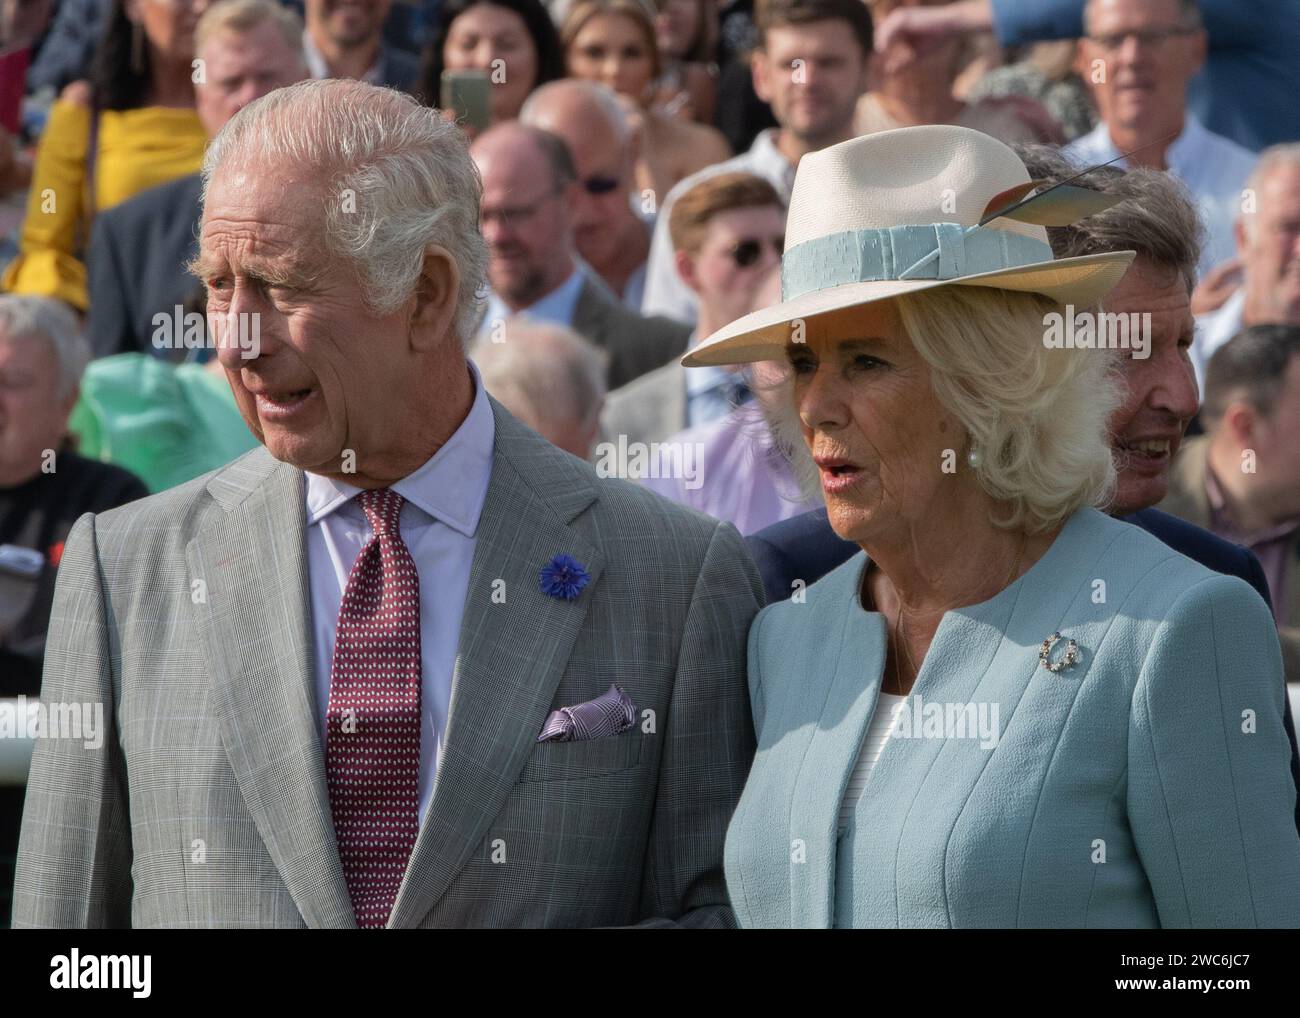 HM The King & HM The Queen at Doncaster Racecourse - St Leger 2023 - Desert Hero - Tom Marquand - William Haggas Stock Photo